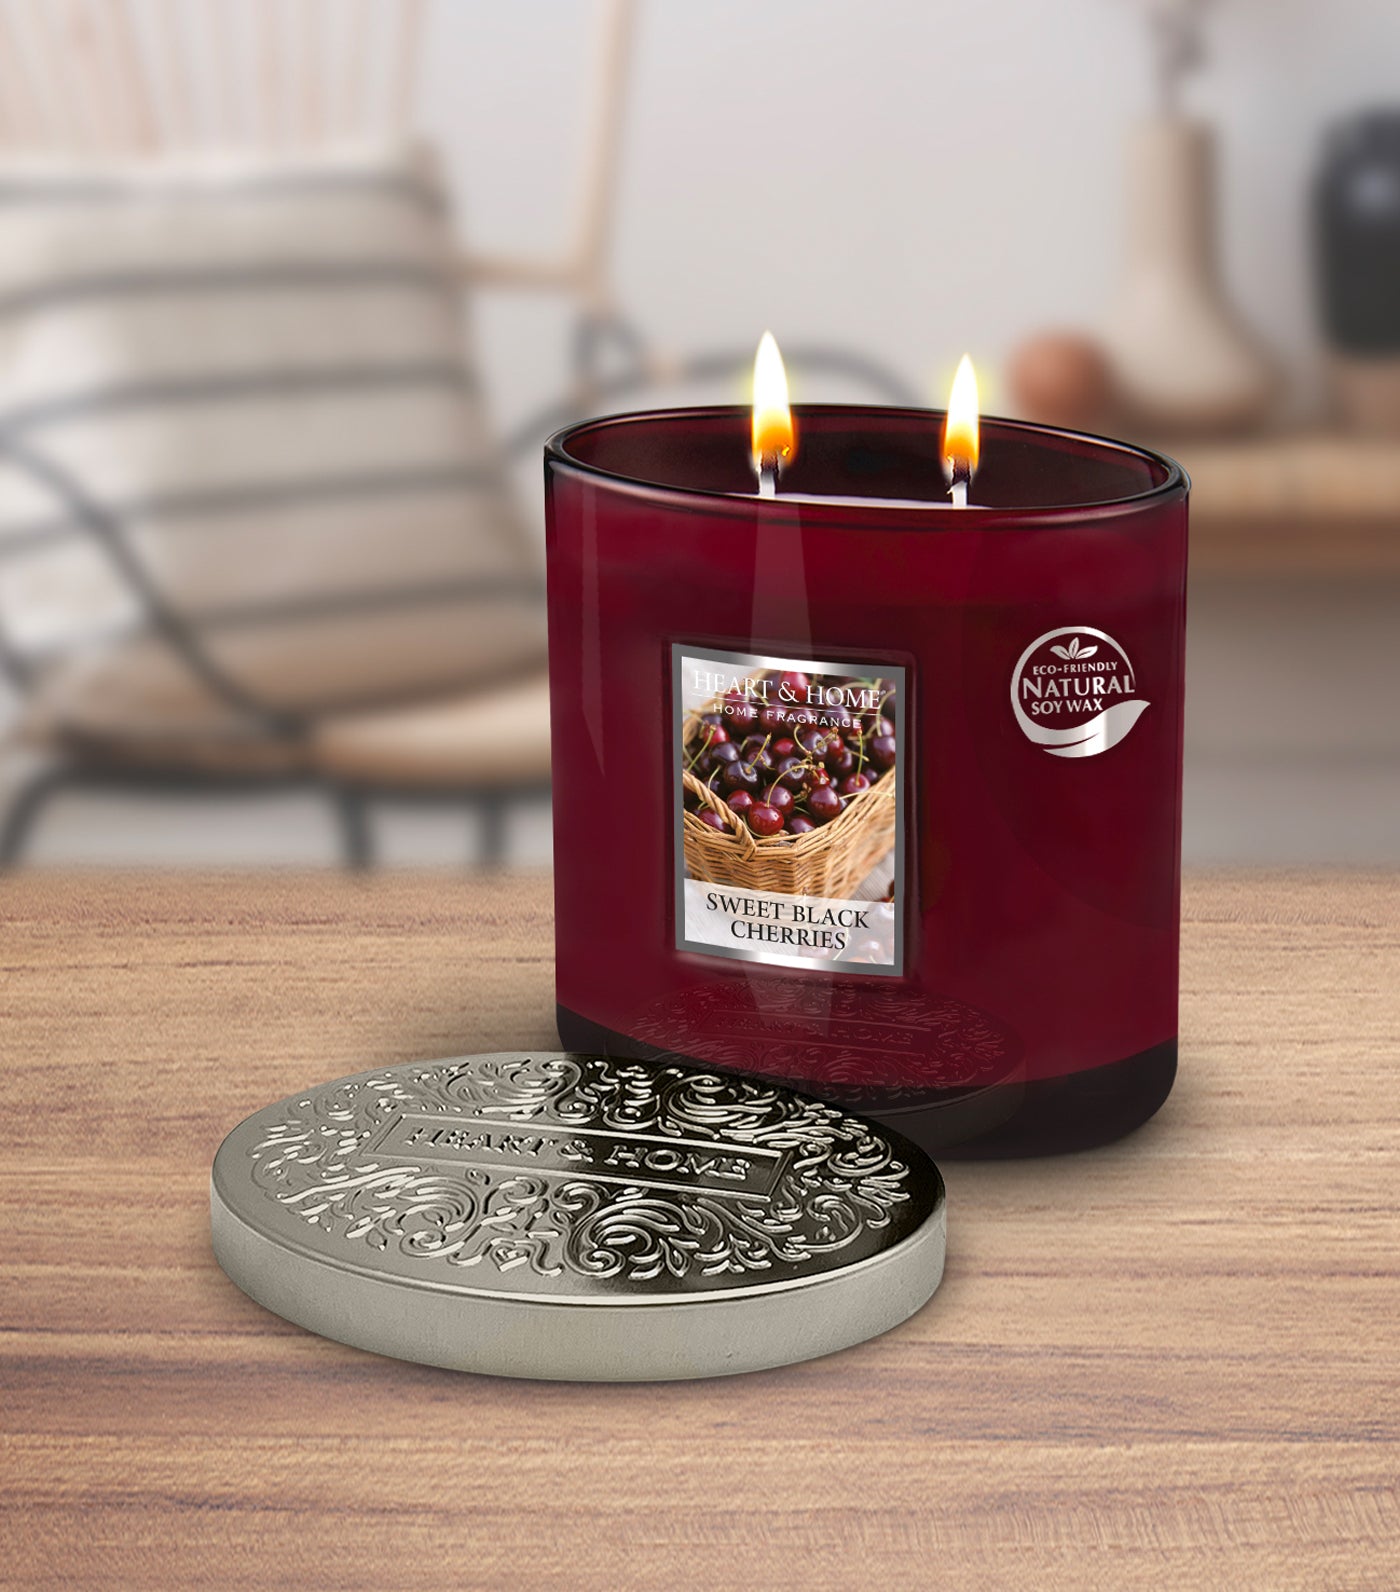 heart & home sweet black cherries - twin wick soy candle